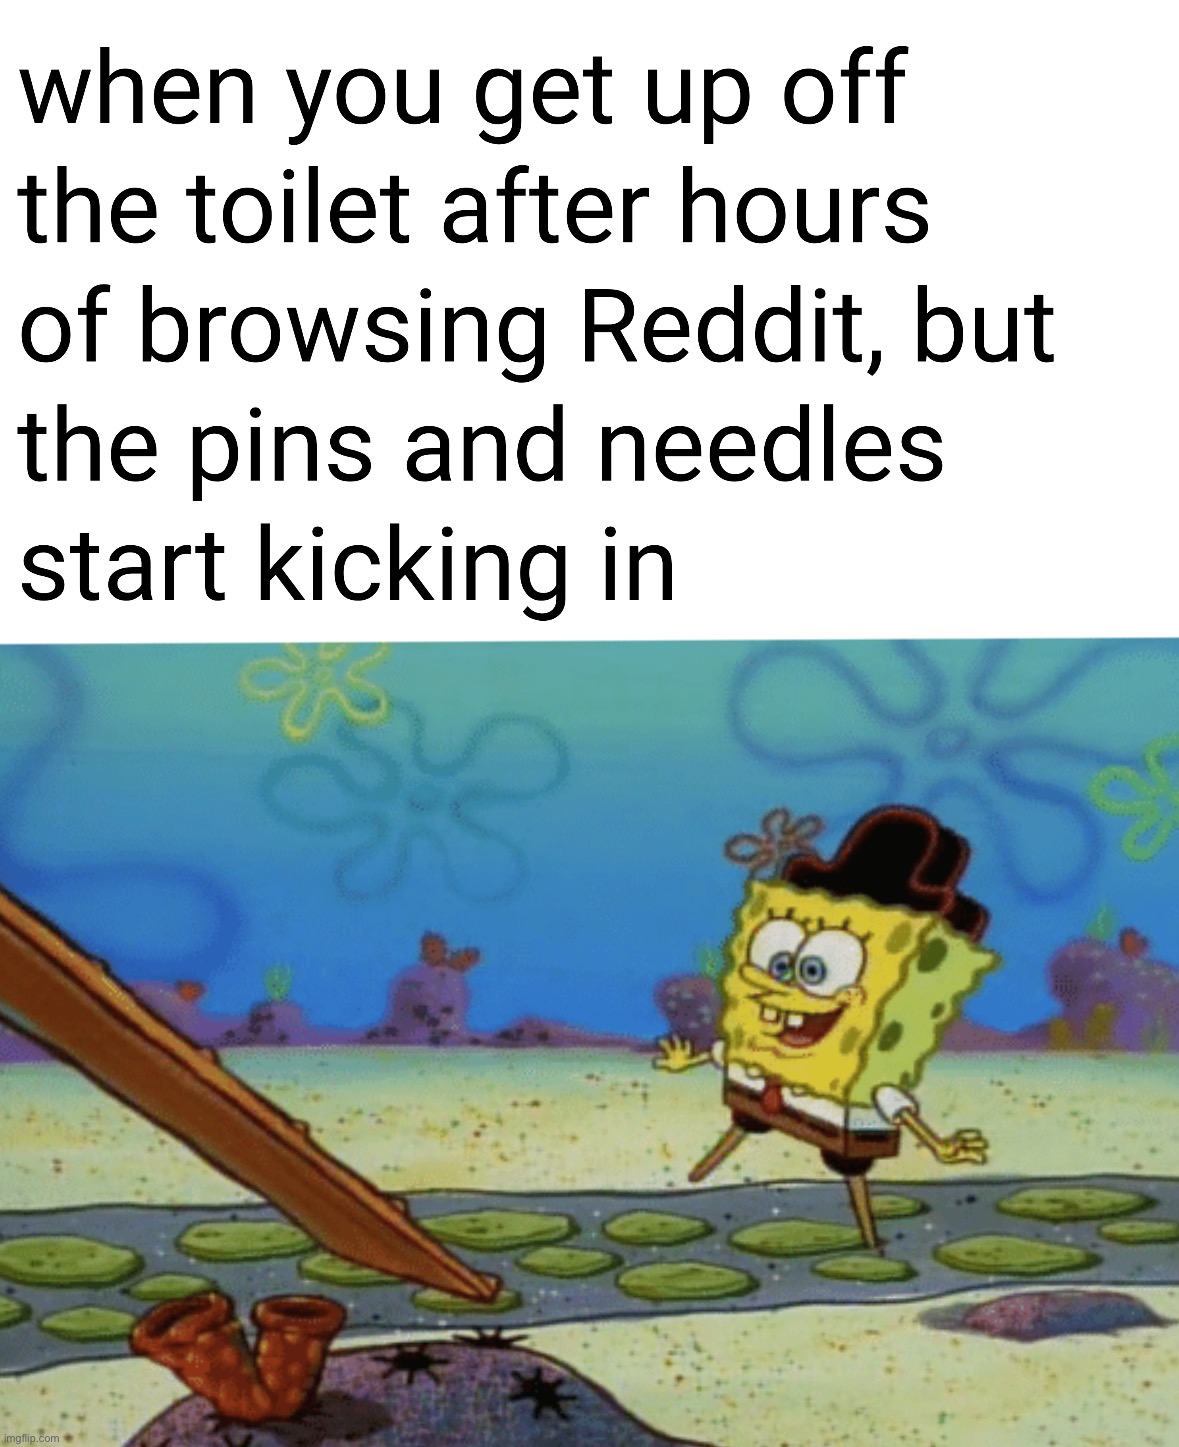 Ouch | image tagged in memes,funny,spongebob,pins and needles,ouch,reddit | made w/ Imgflip meme maker